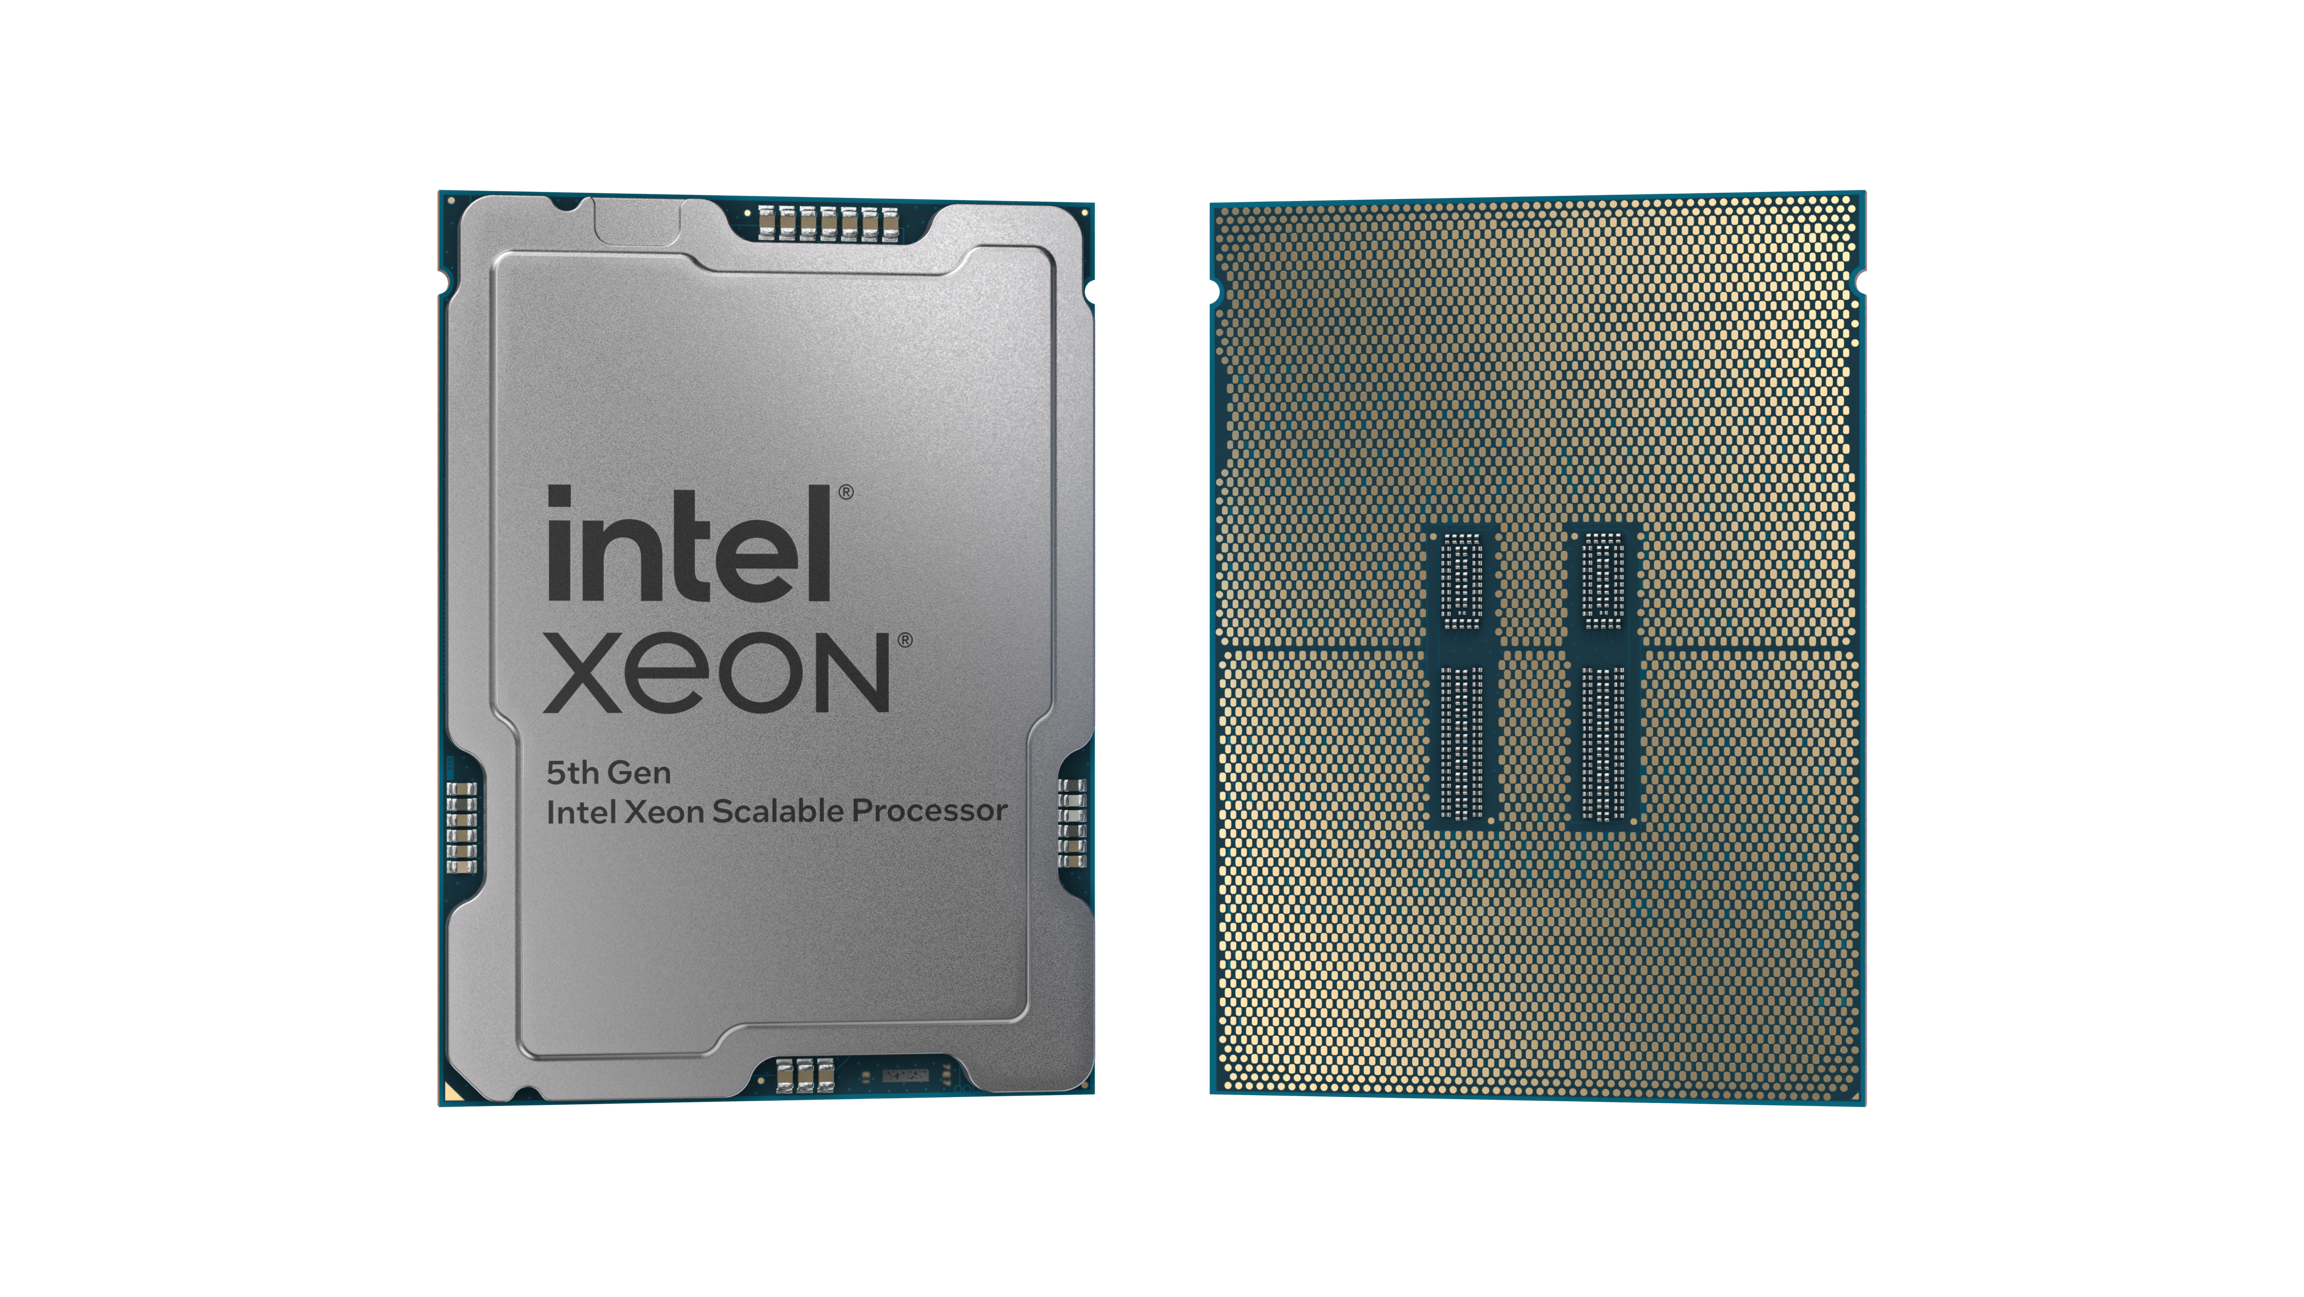 5th Gen Intel Xeon Scalable Processor, formerly Emerald Rapids